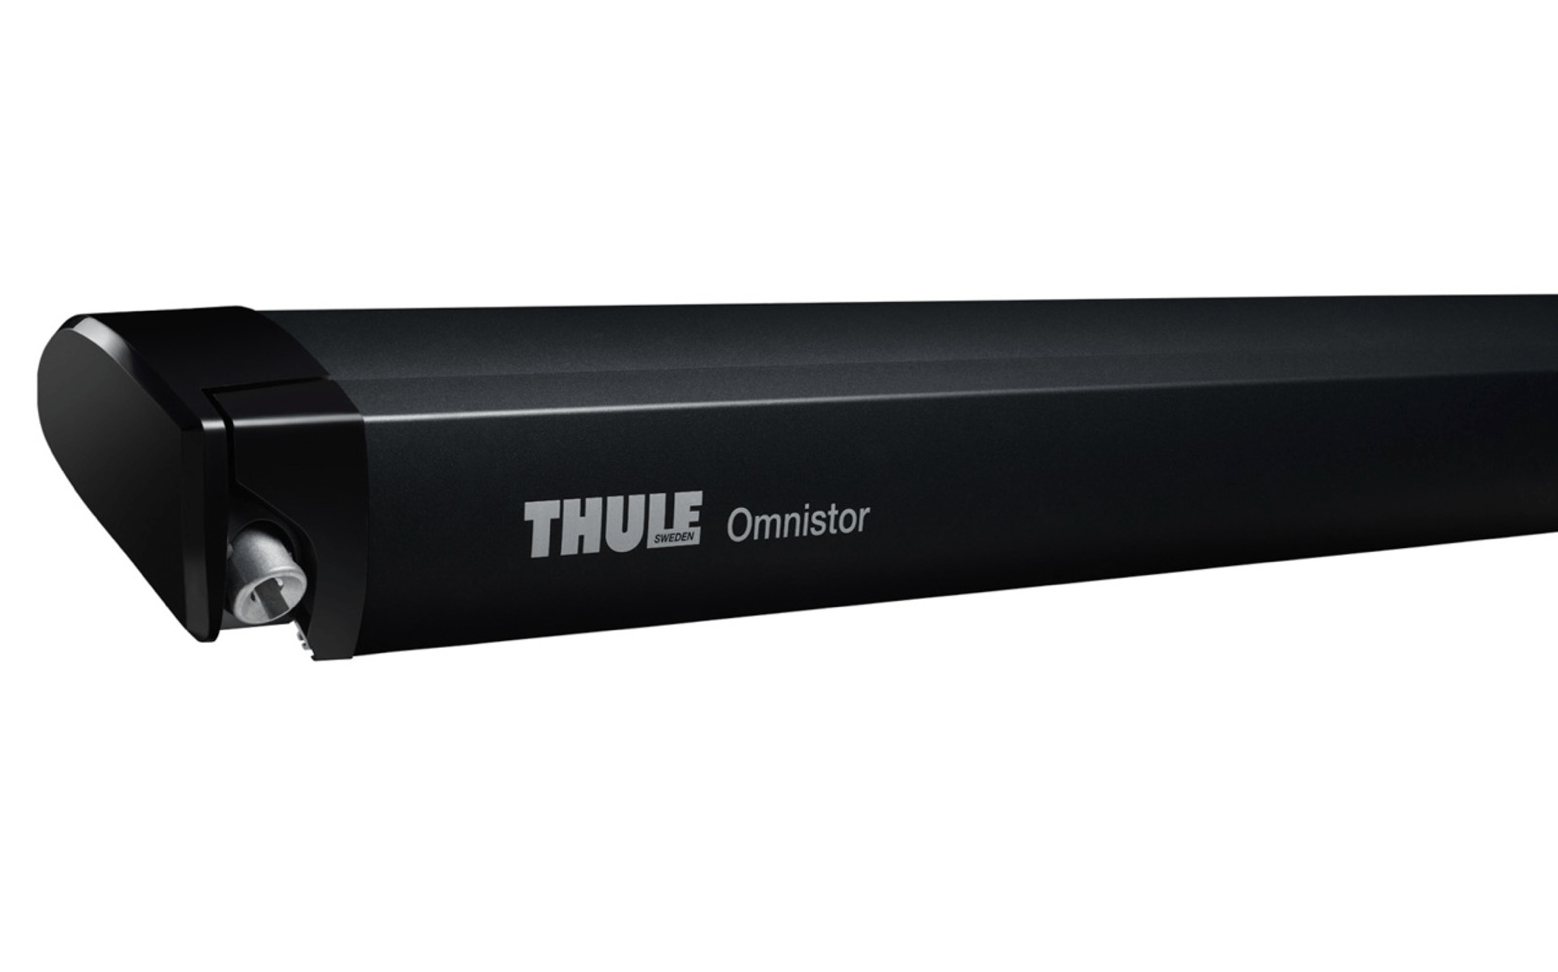 Thule Oministor 6300 Ducato pack - Awning, Bracket & Seal - Letang Auto Electrical Vehicle Parts